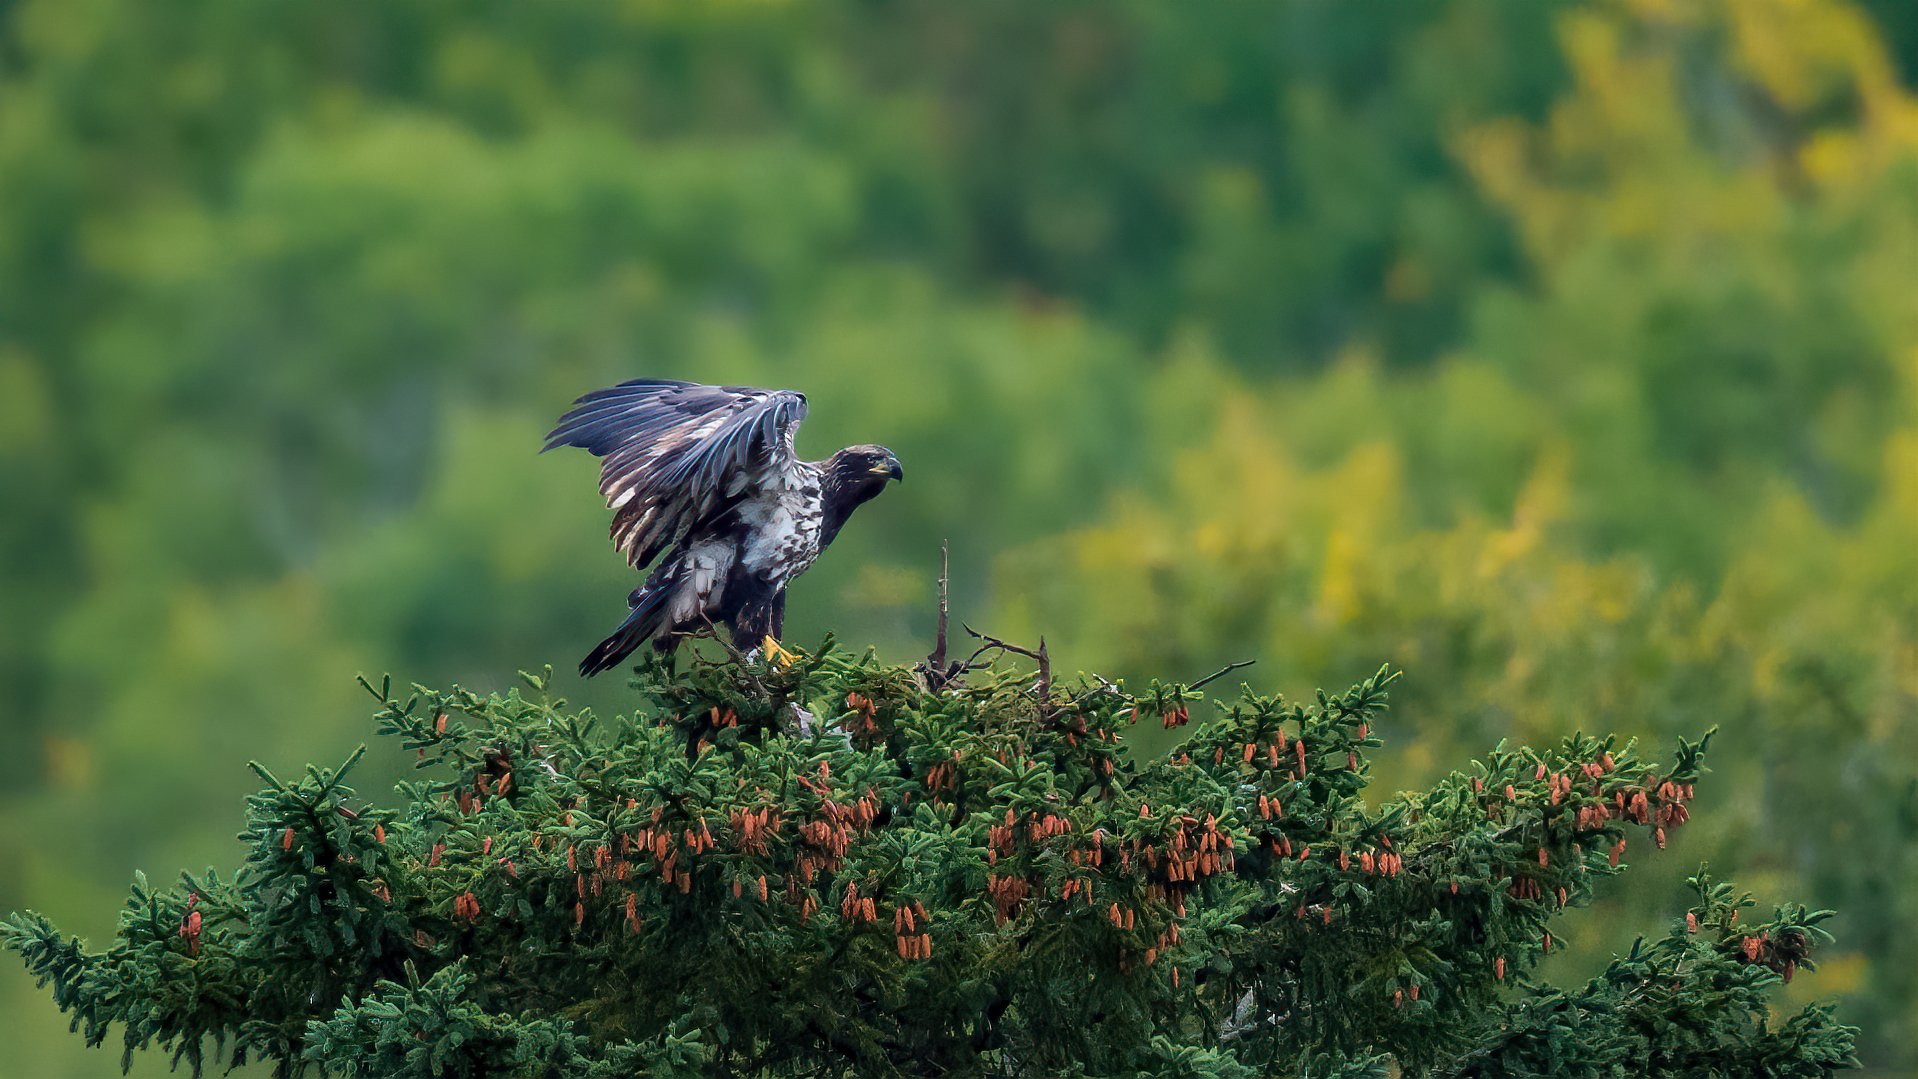 10 A young bald eagle has a fine perch overlooking the valley from the top of a spruce tree.jpg